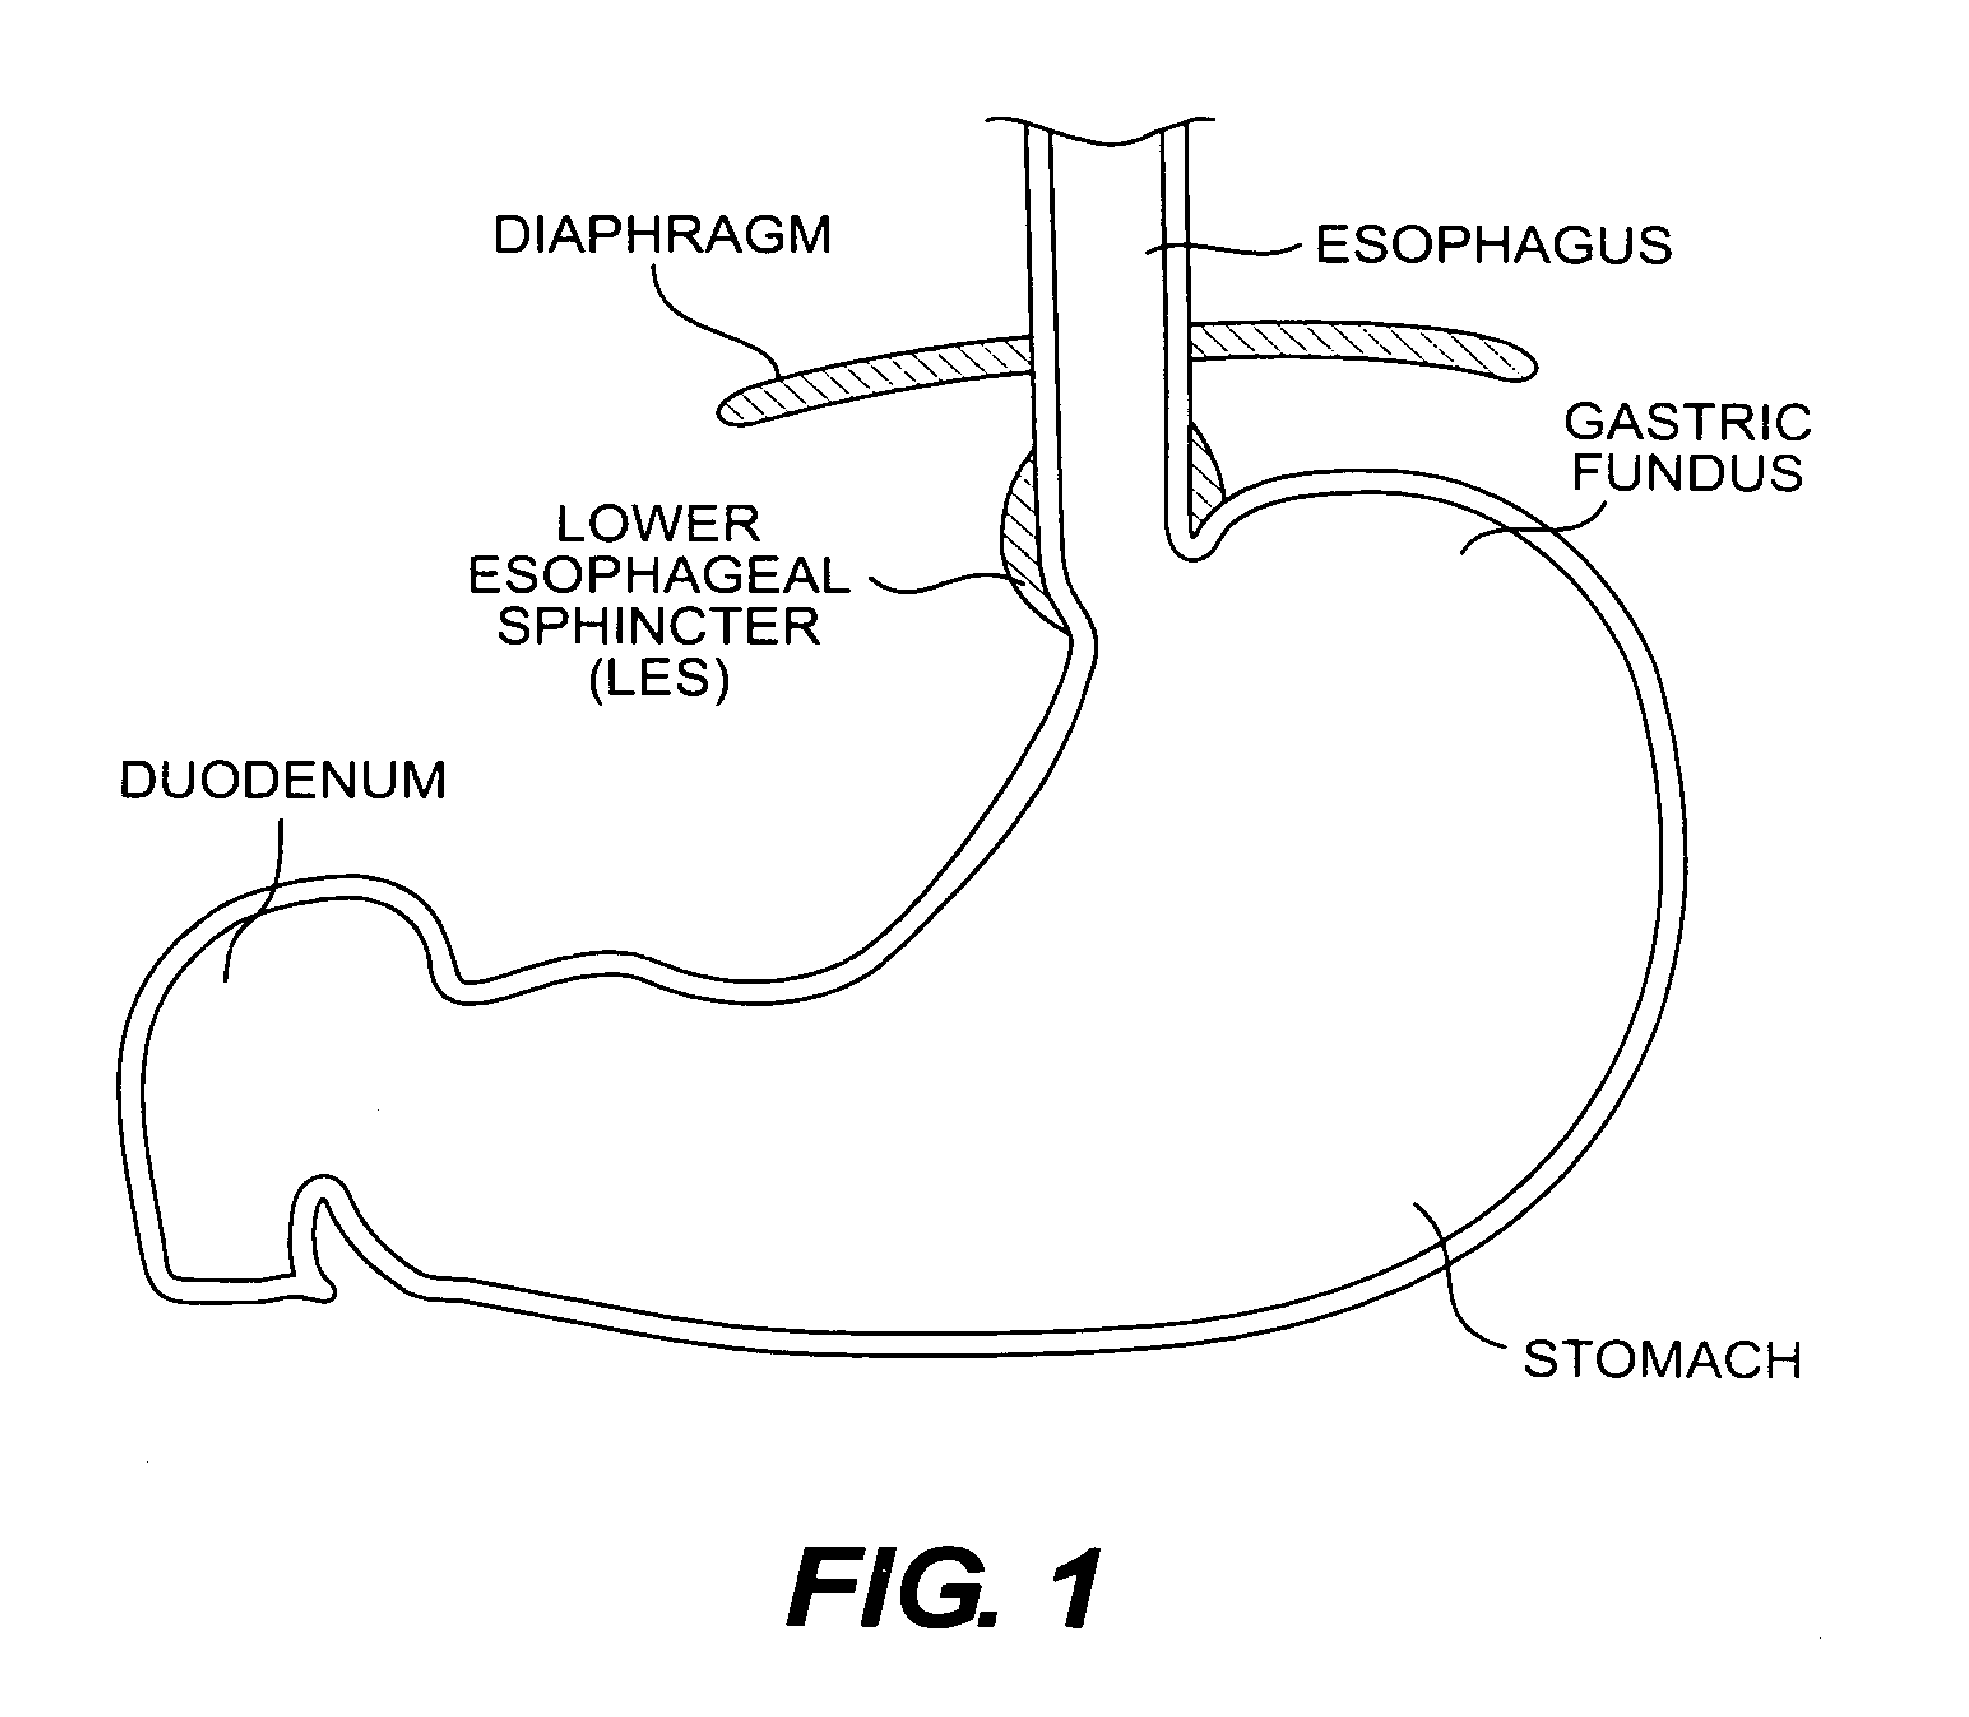 Methods and devices for folding and securing tissue